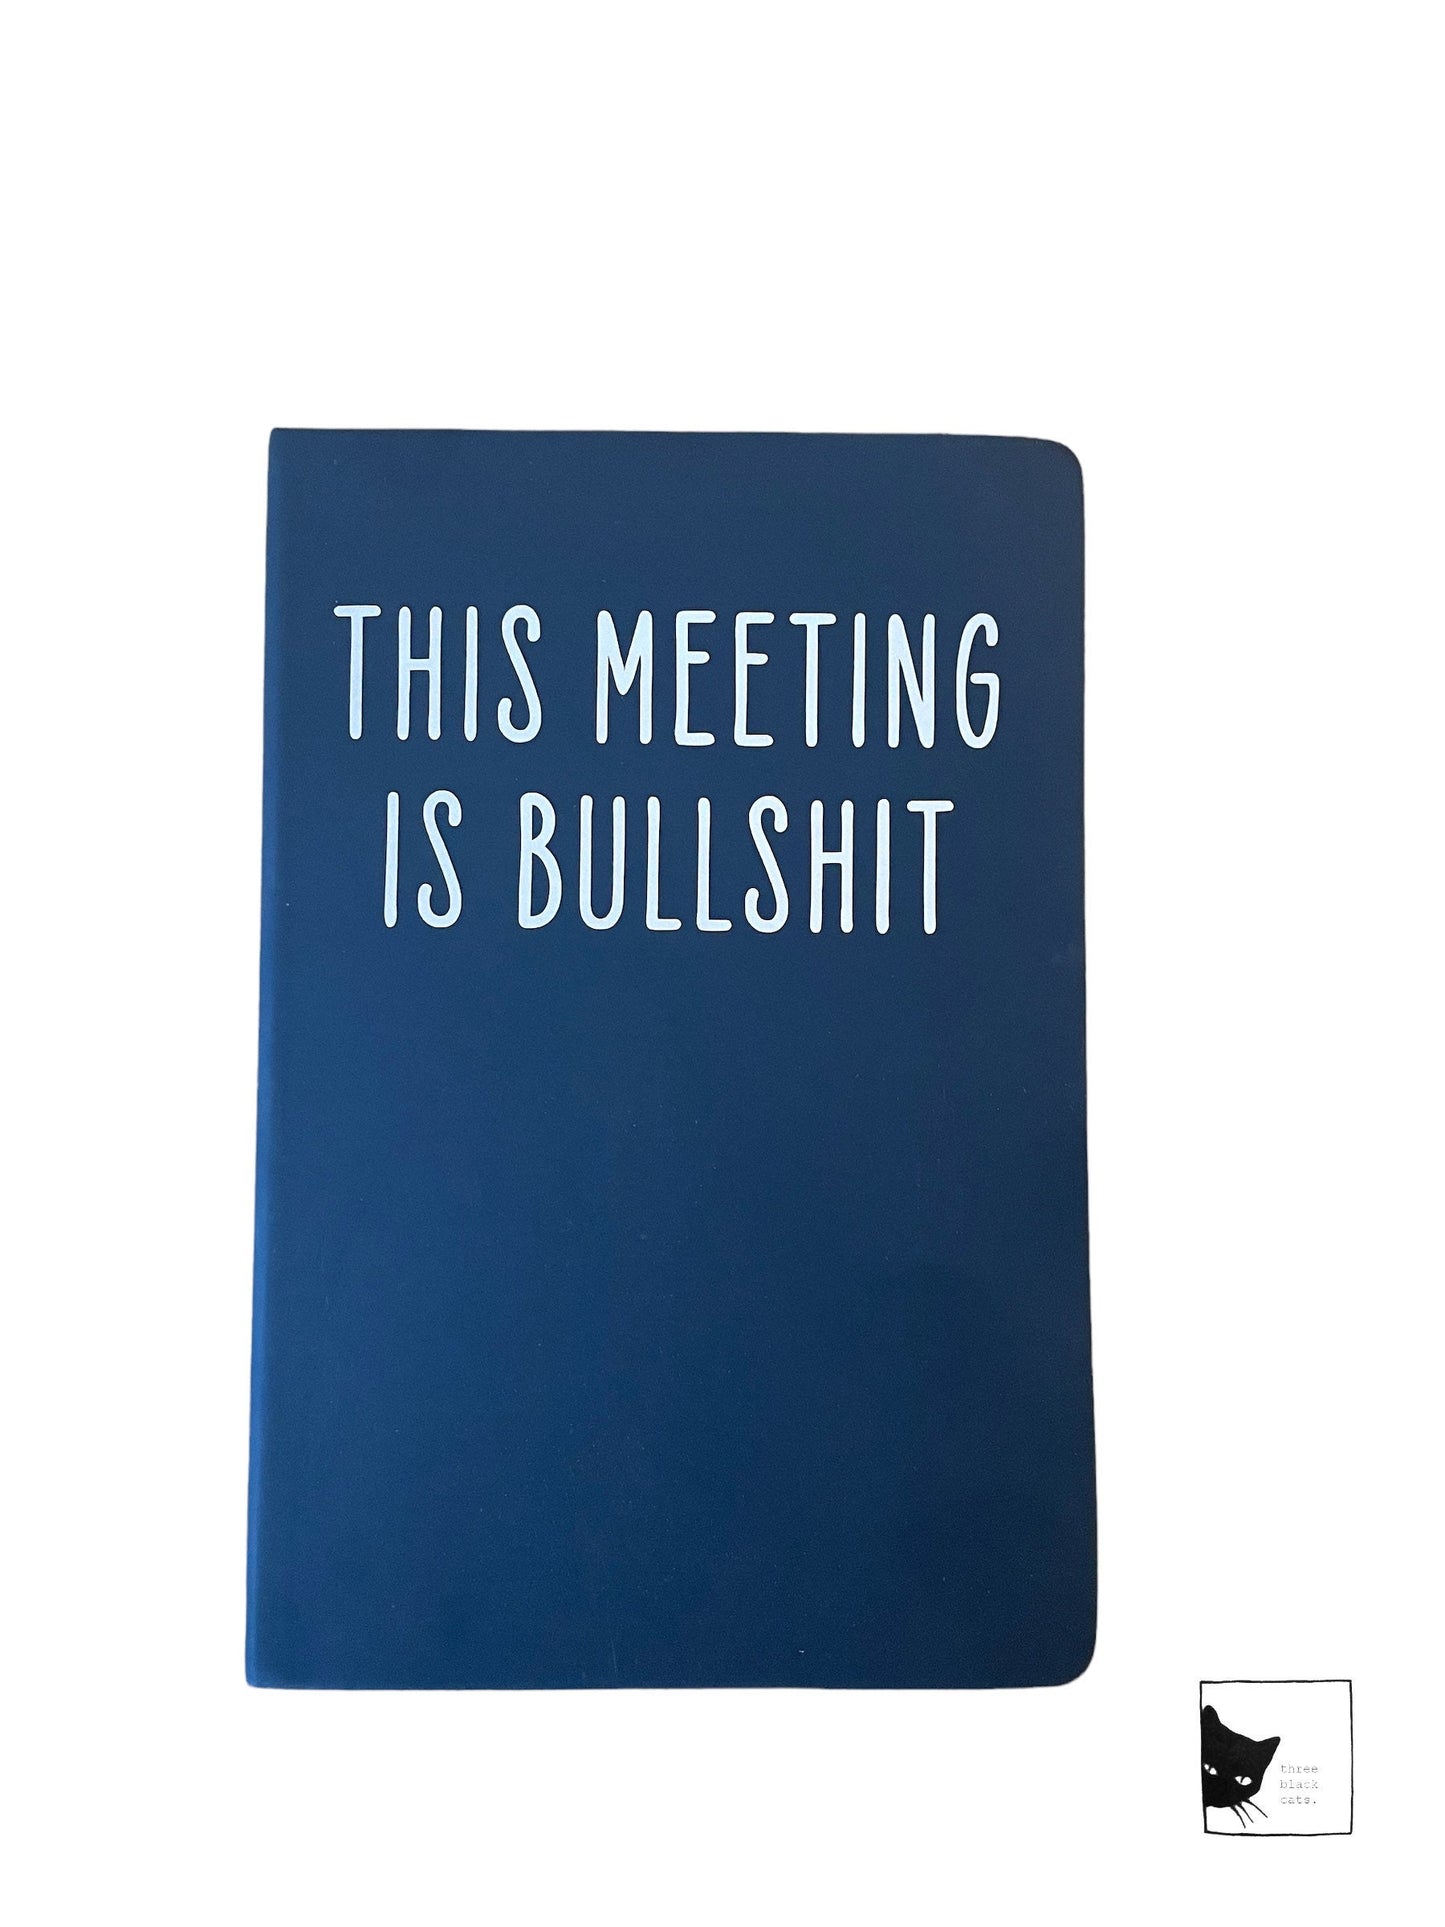 This Meeting is Bullshit, People I want to punch in the face chapter 1, or Shit I need to Google, Black Lined Journal